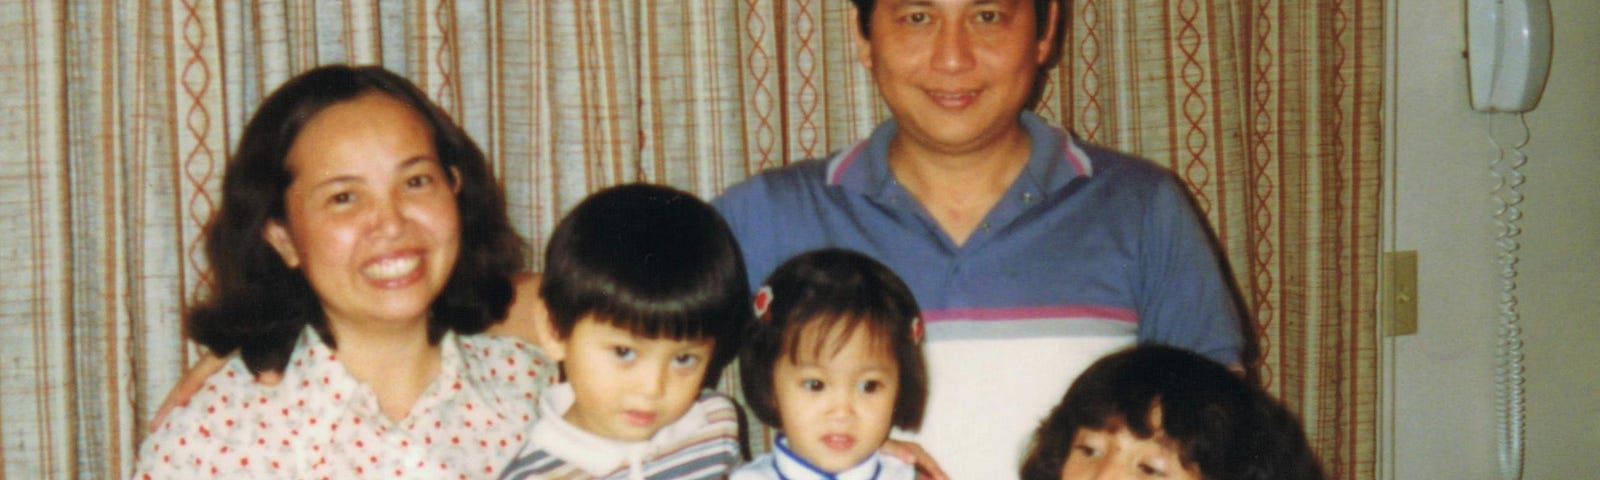 Dr. Kieu as a child with her family